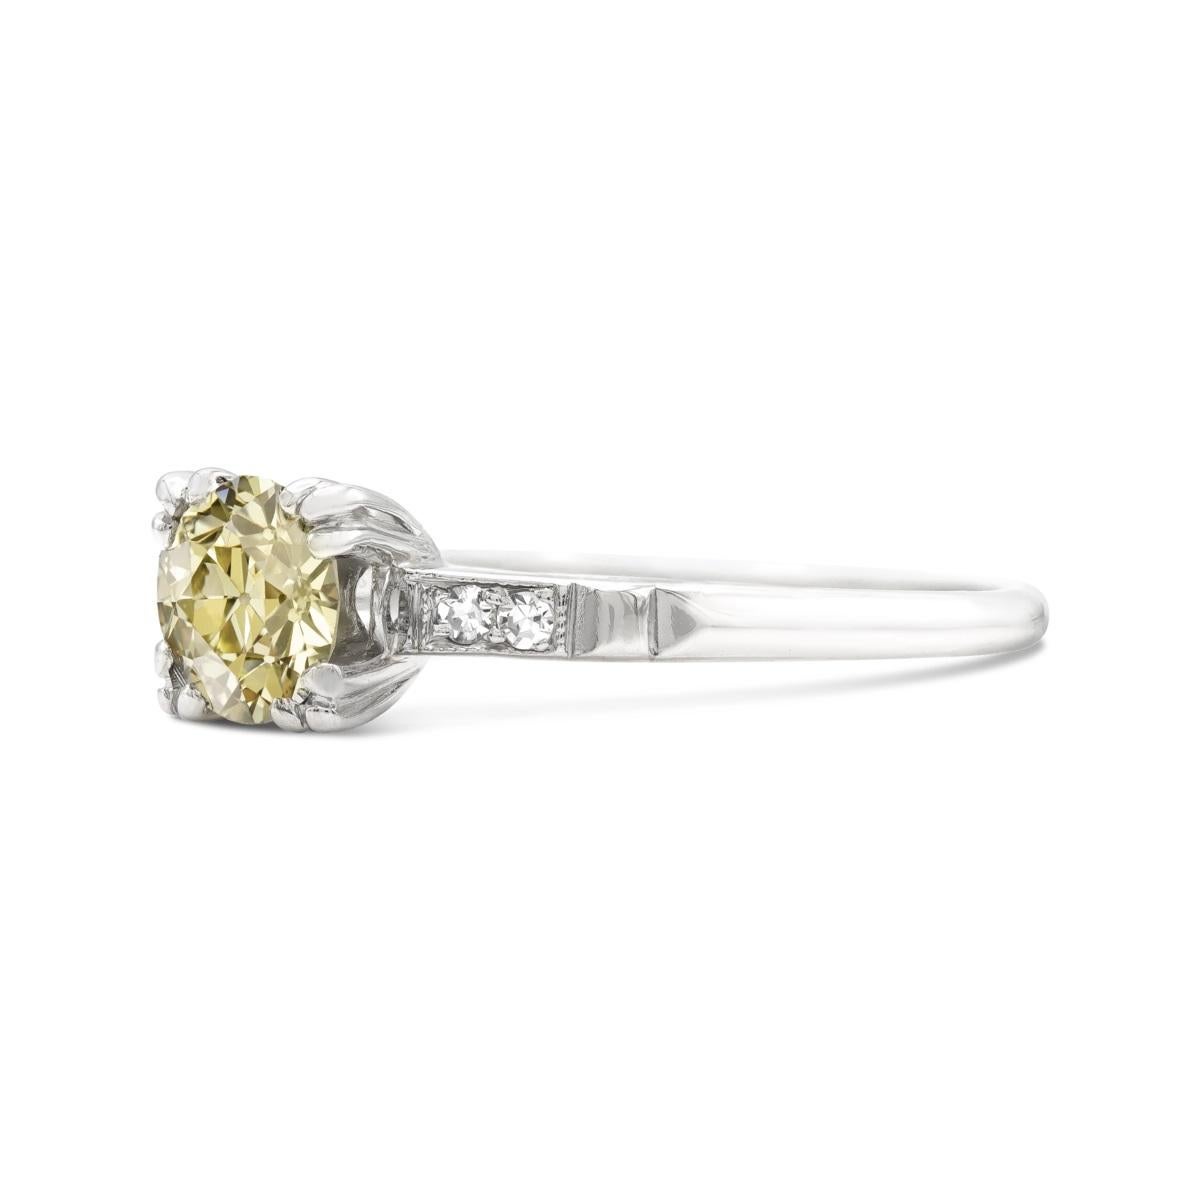 A sunny diamond in an original art deco setting, this ring has all the makings of a unique engagement ring. Centered by a fancy yellow 1.21 carat old European cut, the diamond has the old-world proportions that make antique diamonds so attractive.